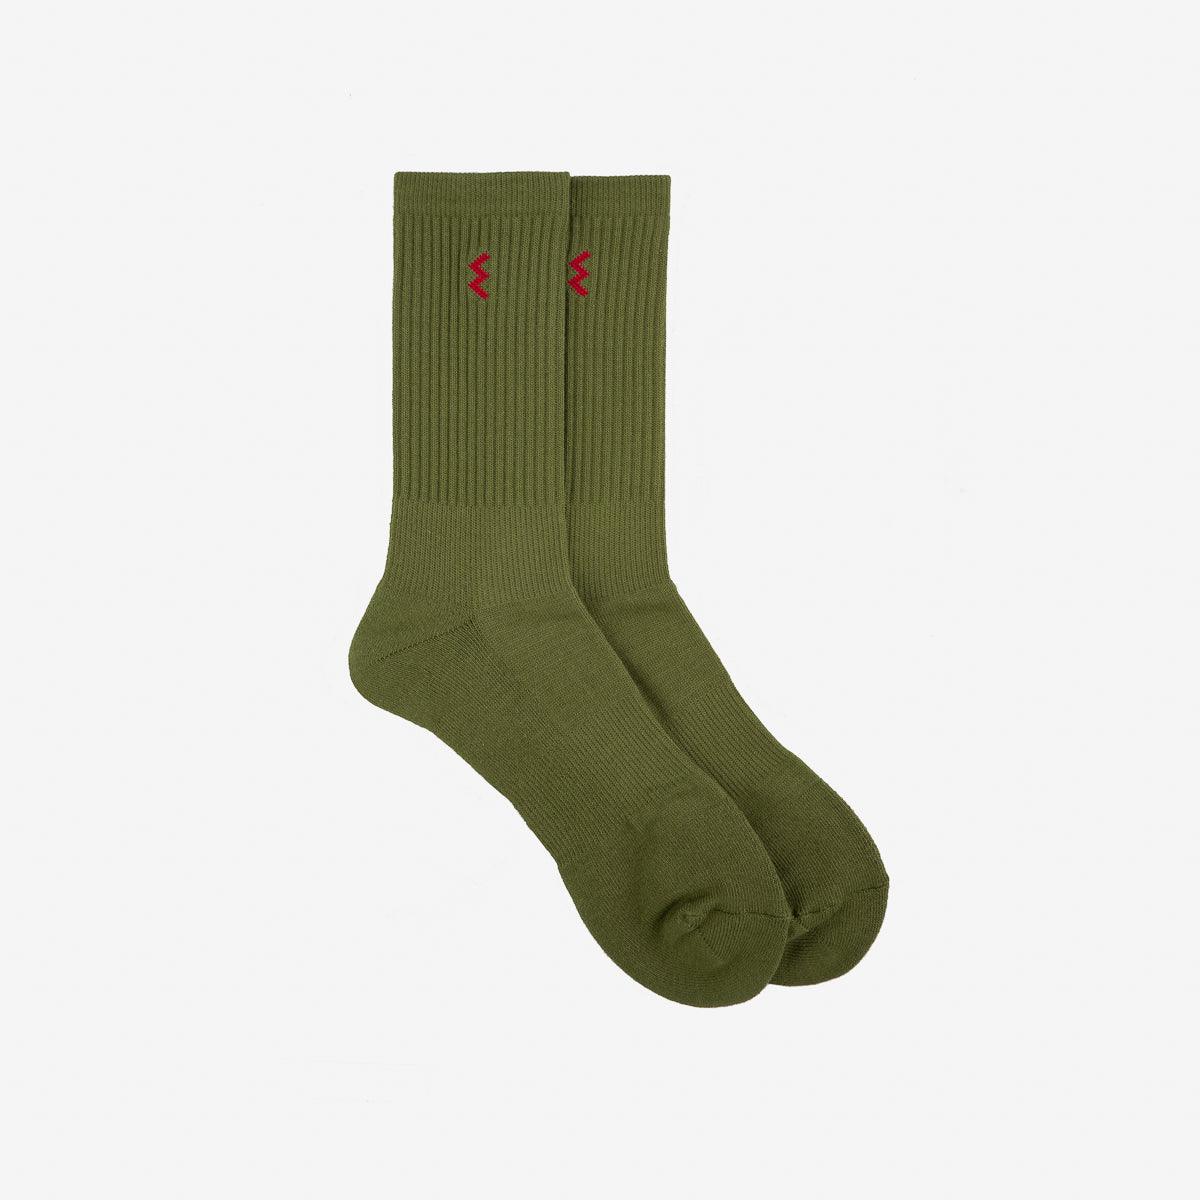 Image showing the IHG-030/3-OLV - 3-Pack Iron Heart Boot Socks - Olive which is a Socks described by the following info Footwear, Iron Heart, New, Released, Socks and sold on the IRON HEART GERMANY online store